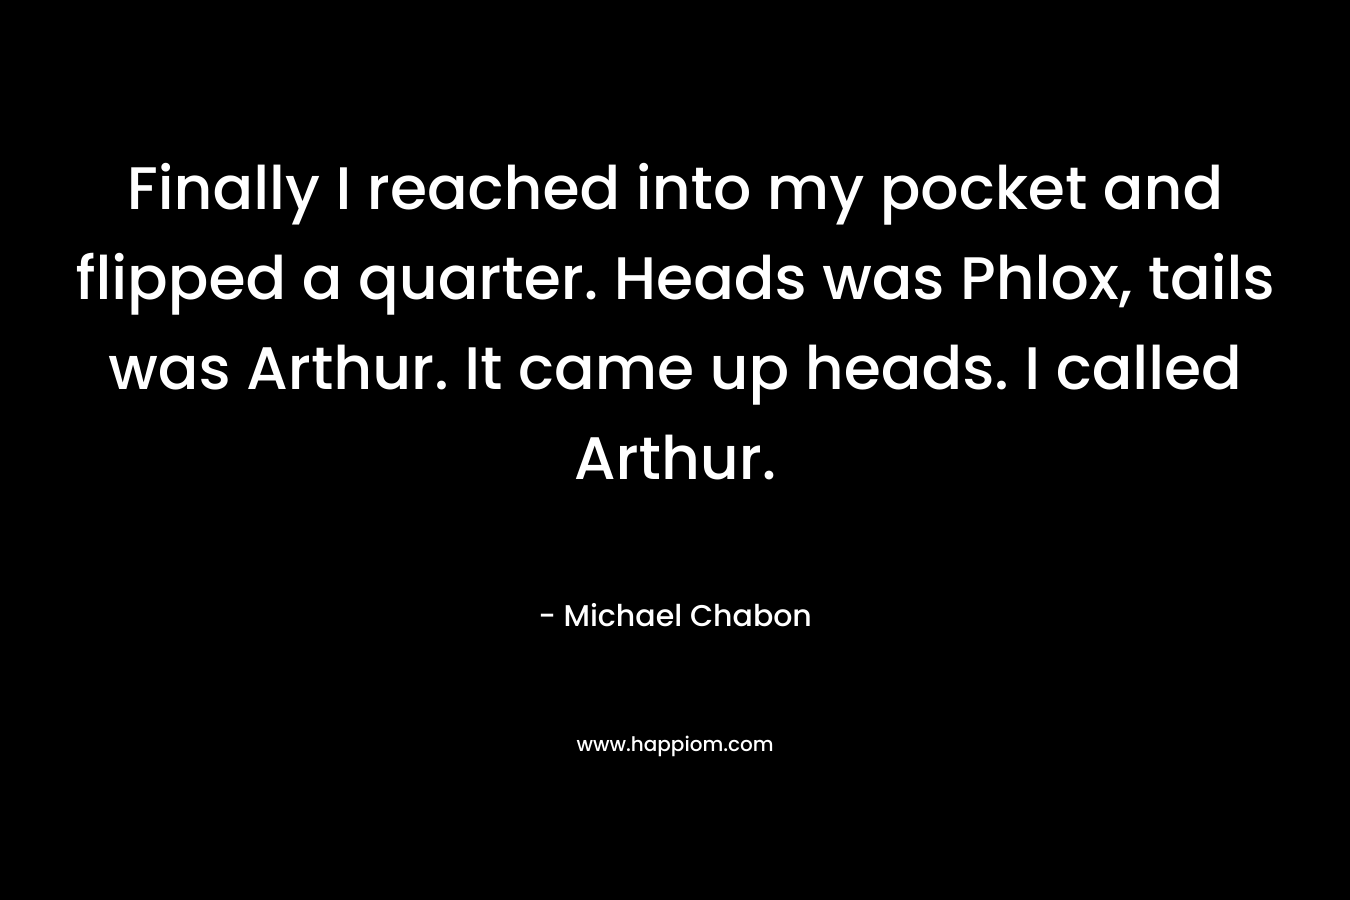 Finally I reached into my pocket and flipped a quarter. Heads was Phlox, tails was Arthur. It came up heads. I called Arthur. – Michael Chabon